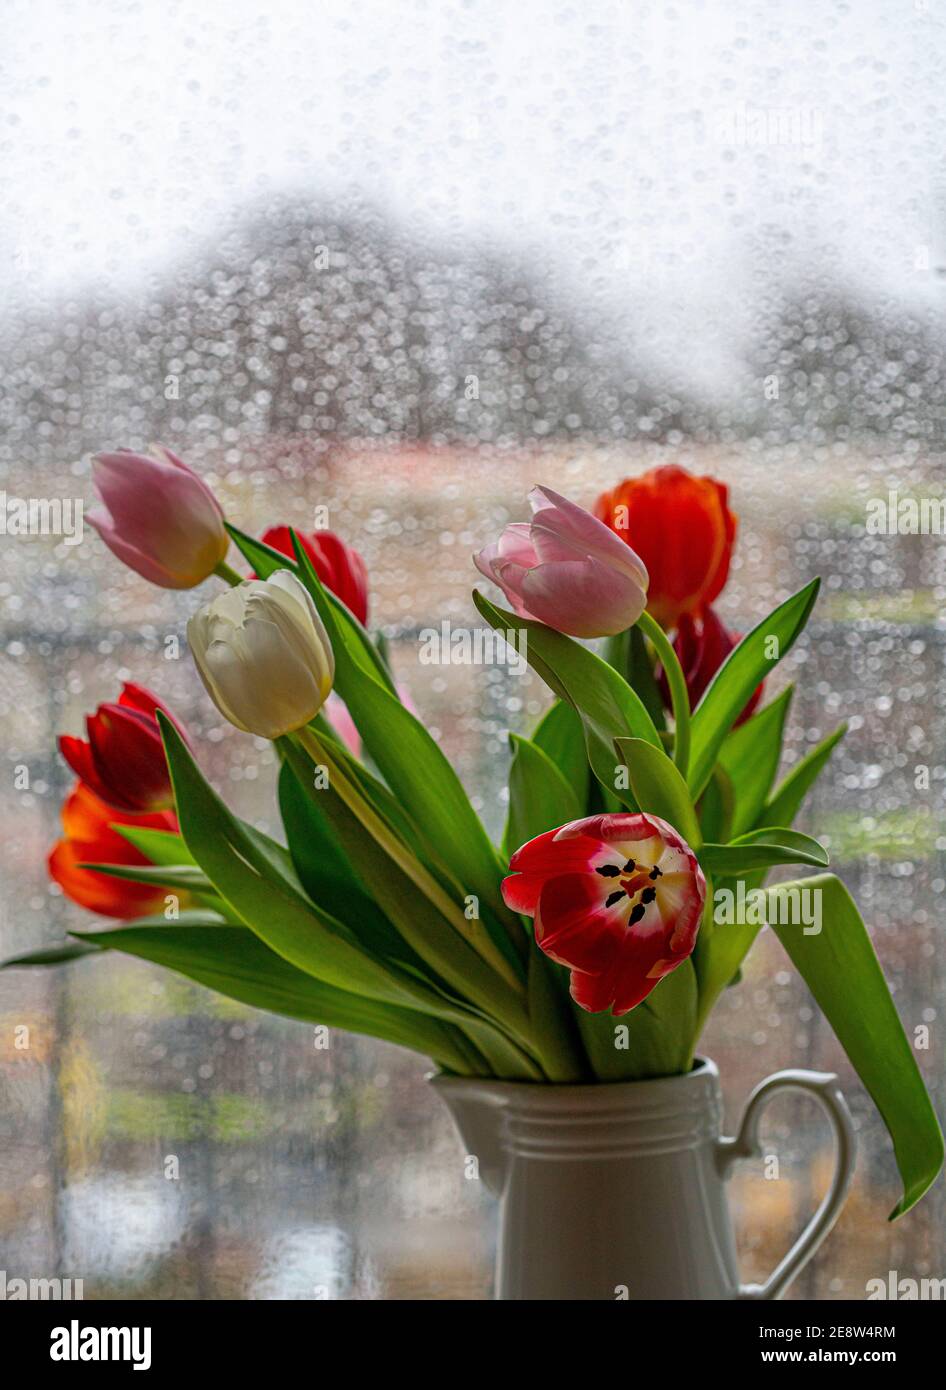 Rainy weather, raindrops on a window pane, view out of a rainy window, flower vase with colourful tulips, Stock Photo